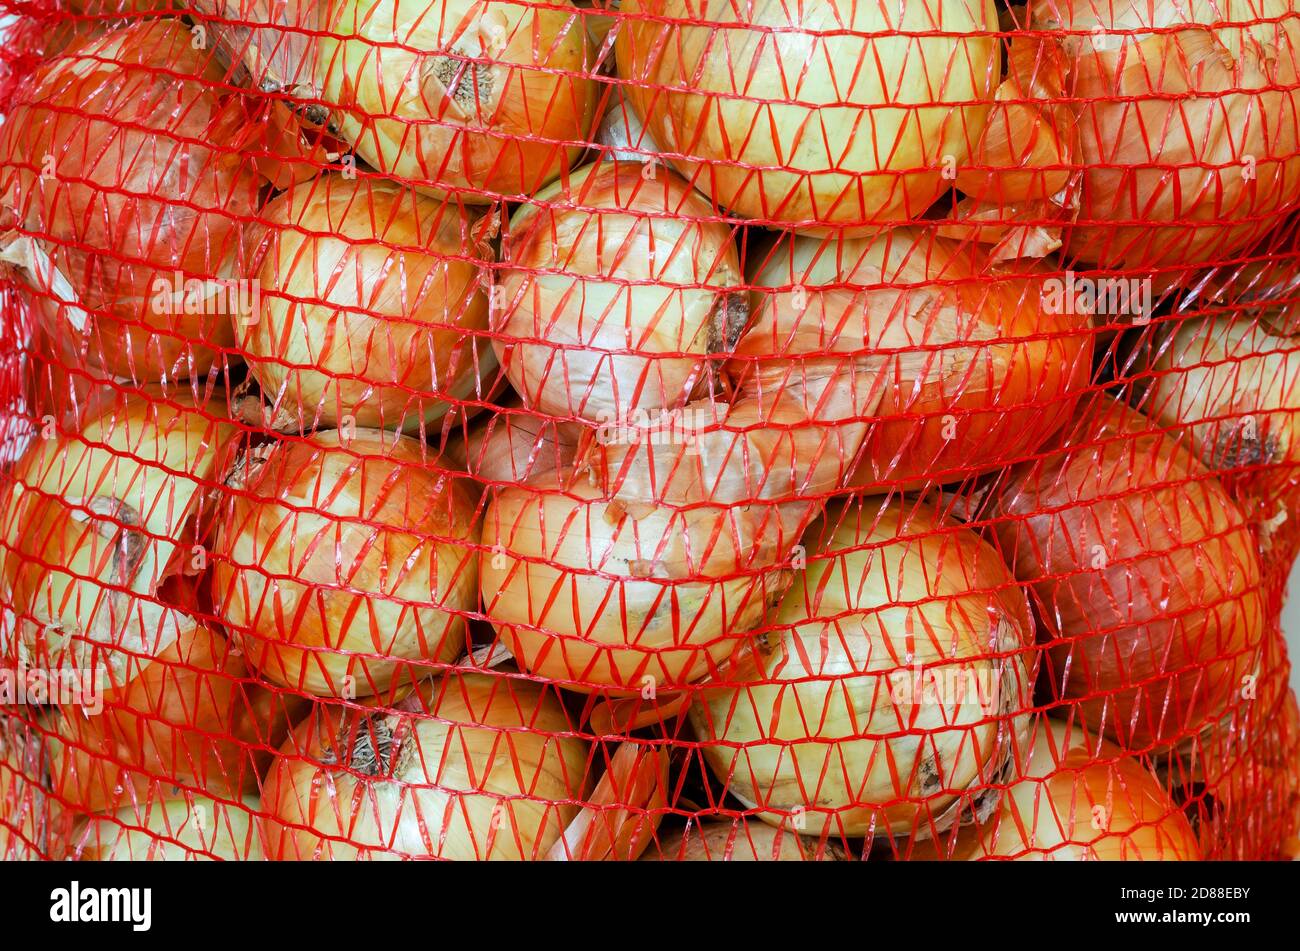 Raw onions in a mesh bag close-up. Vegetable harvest packed in mesh bags.  Agronomy. Without people Stock Photo - Alamy